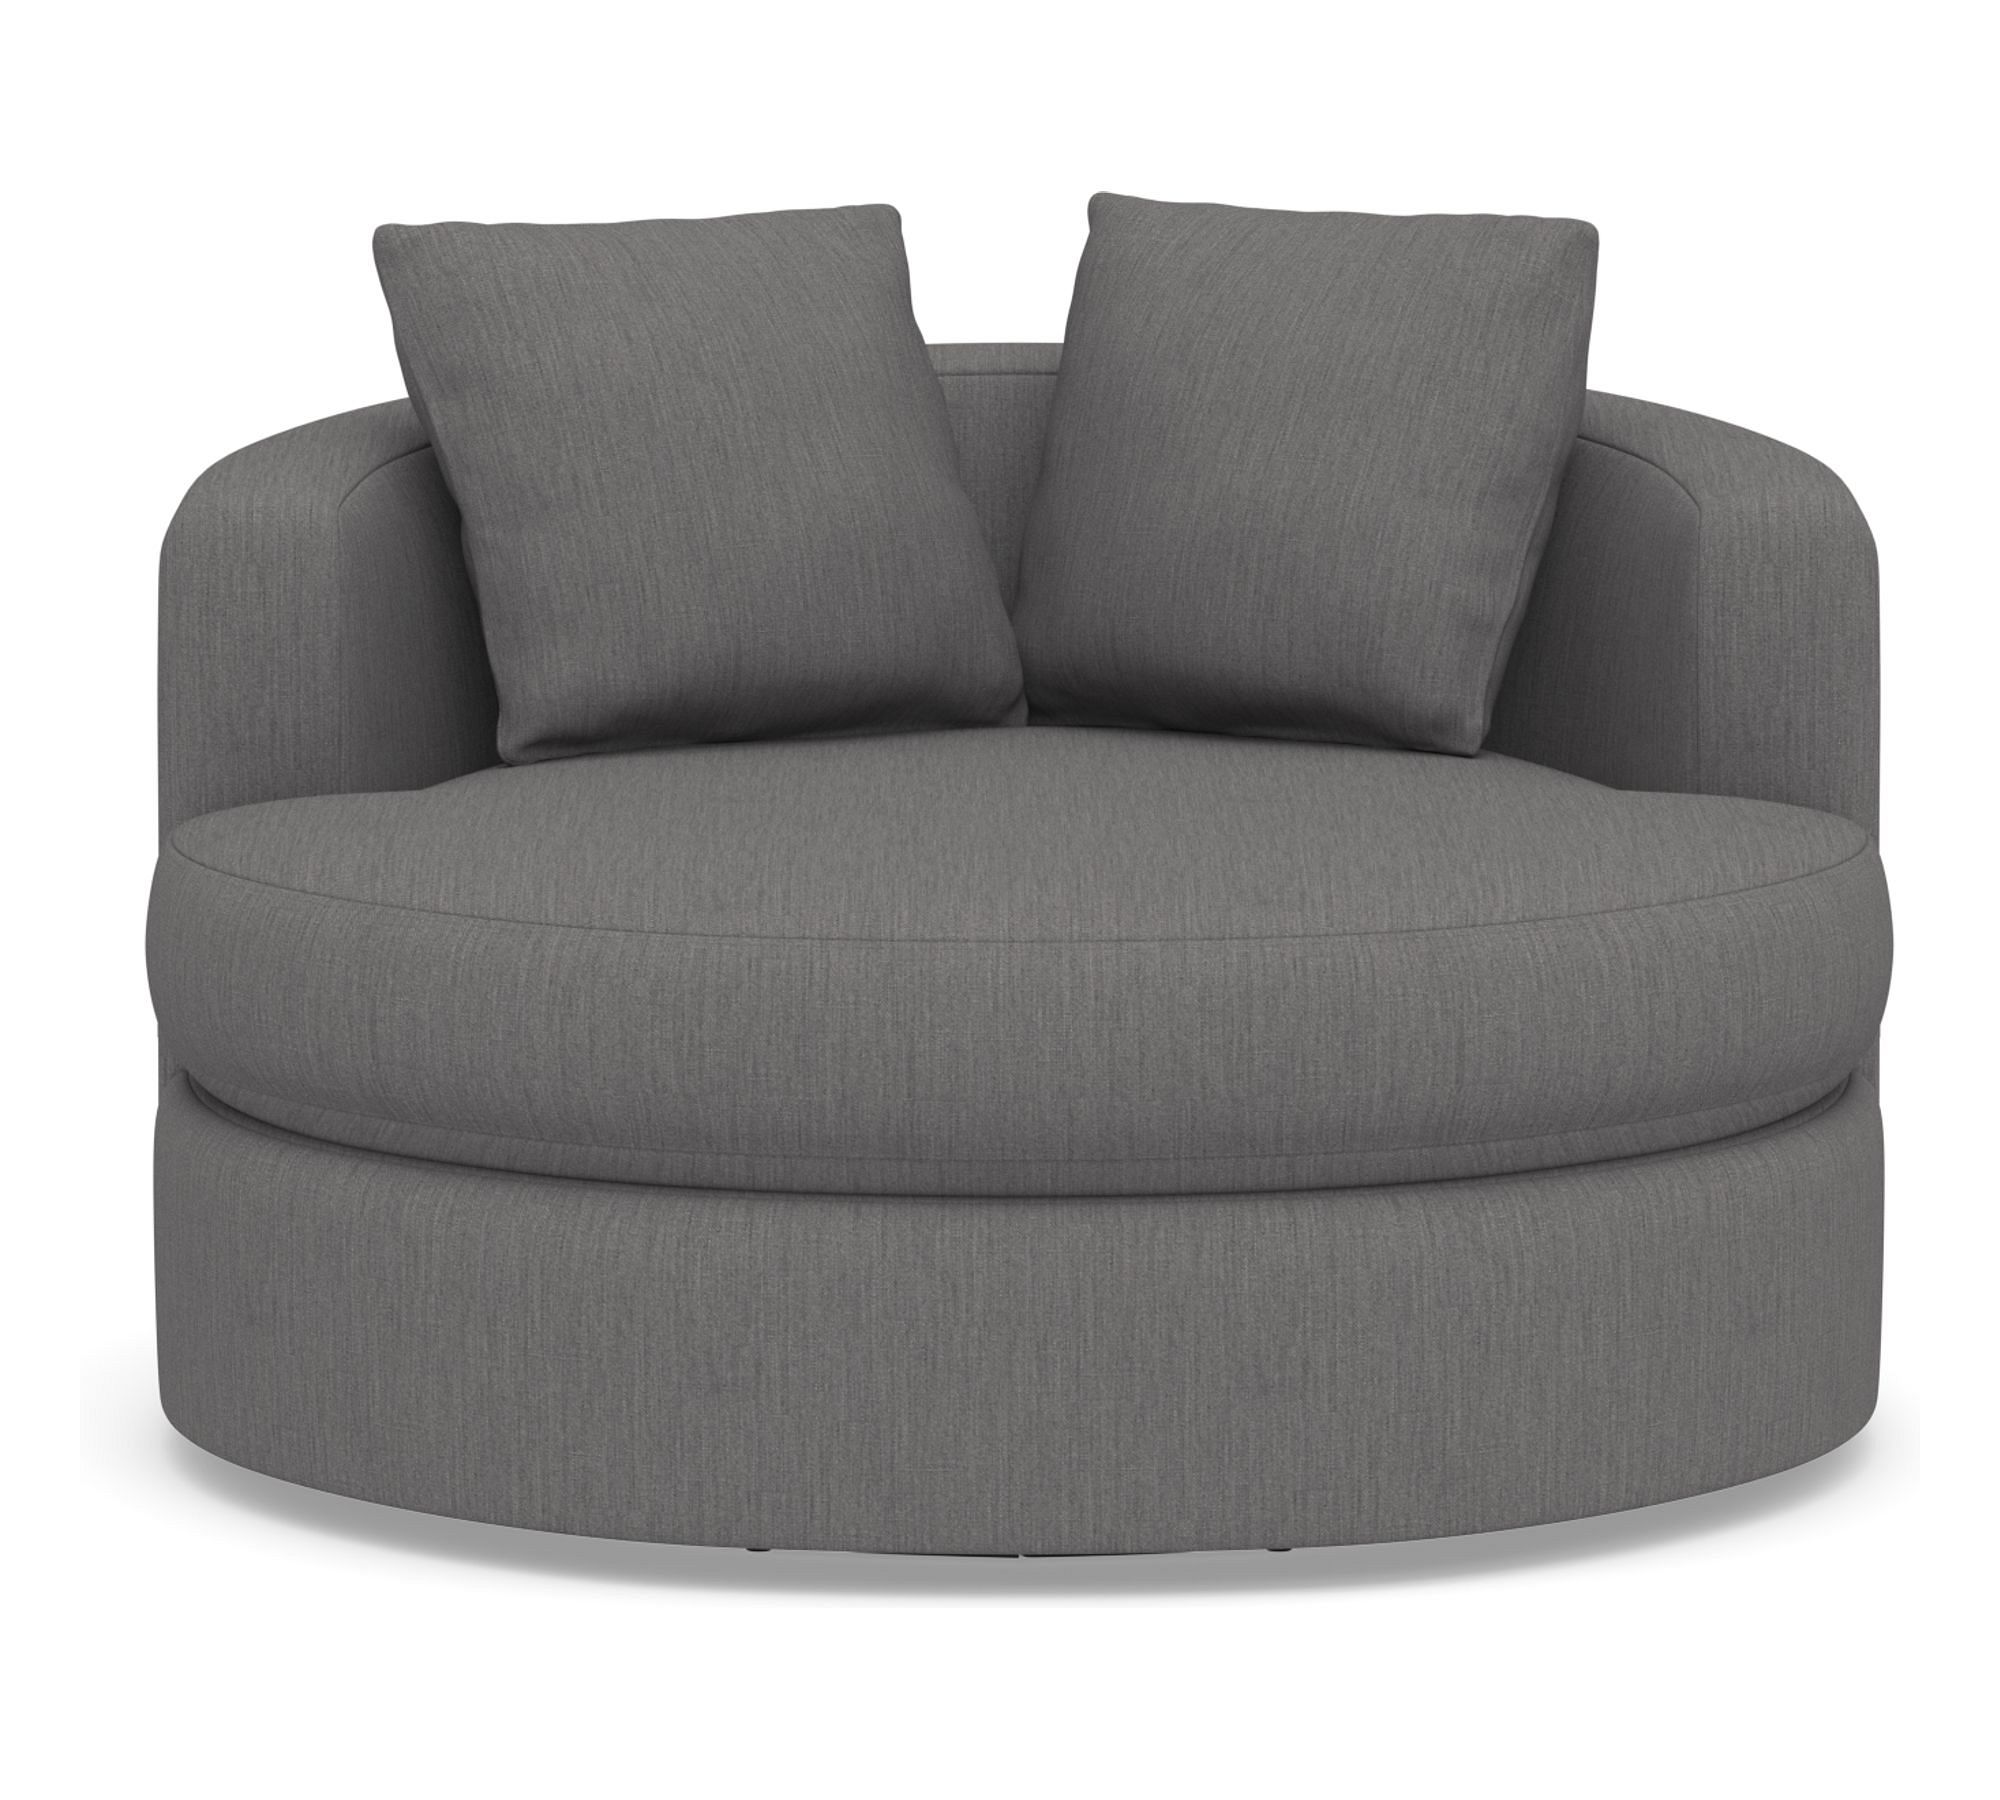 Balboa Upholstered Swivel Grand Outdoor Daybed